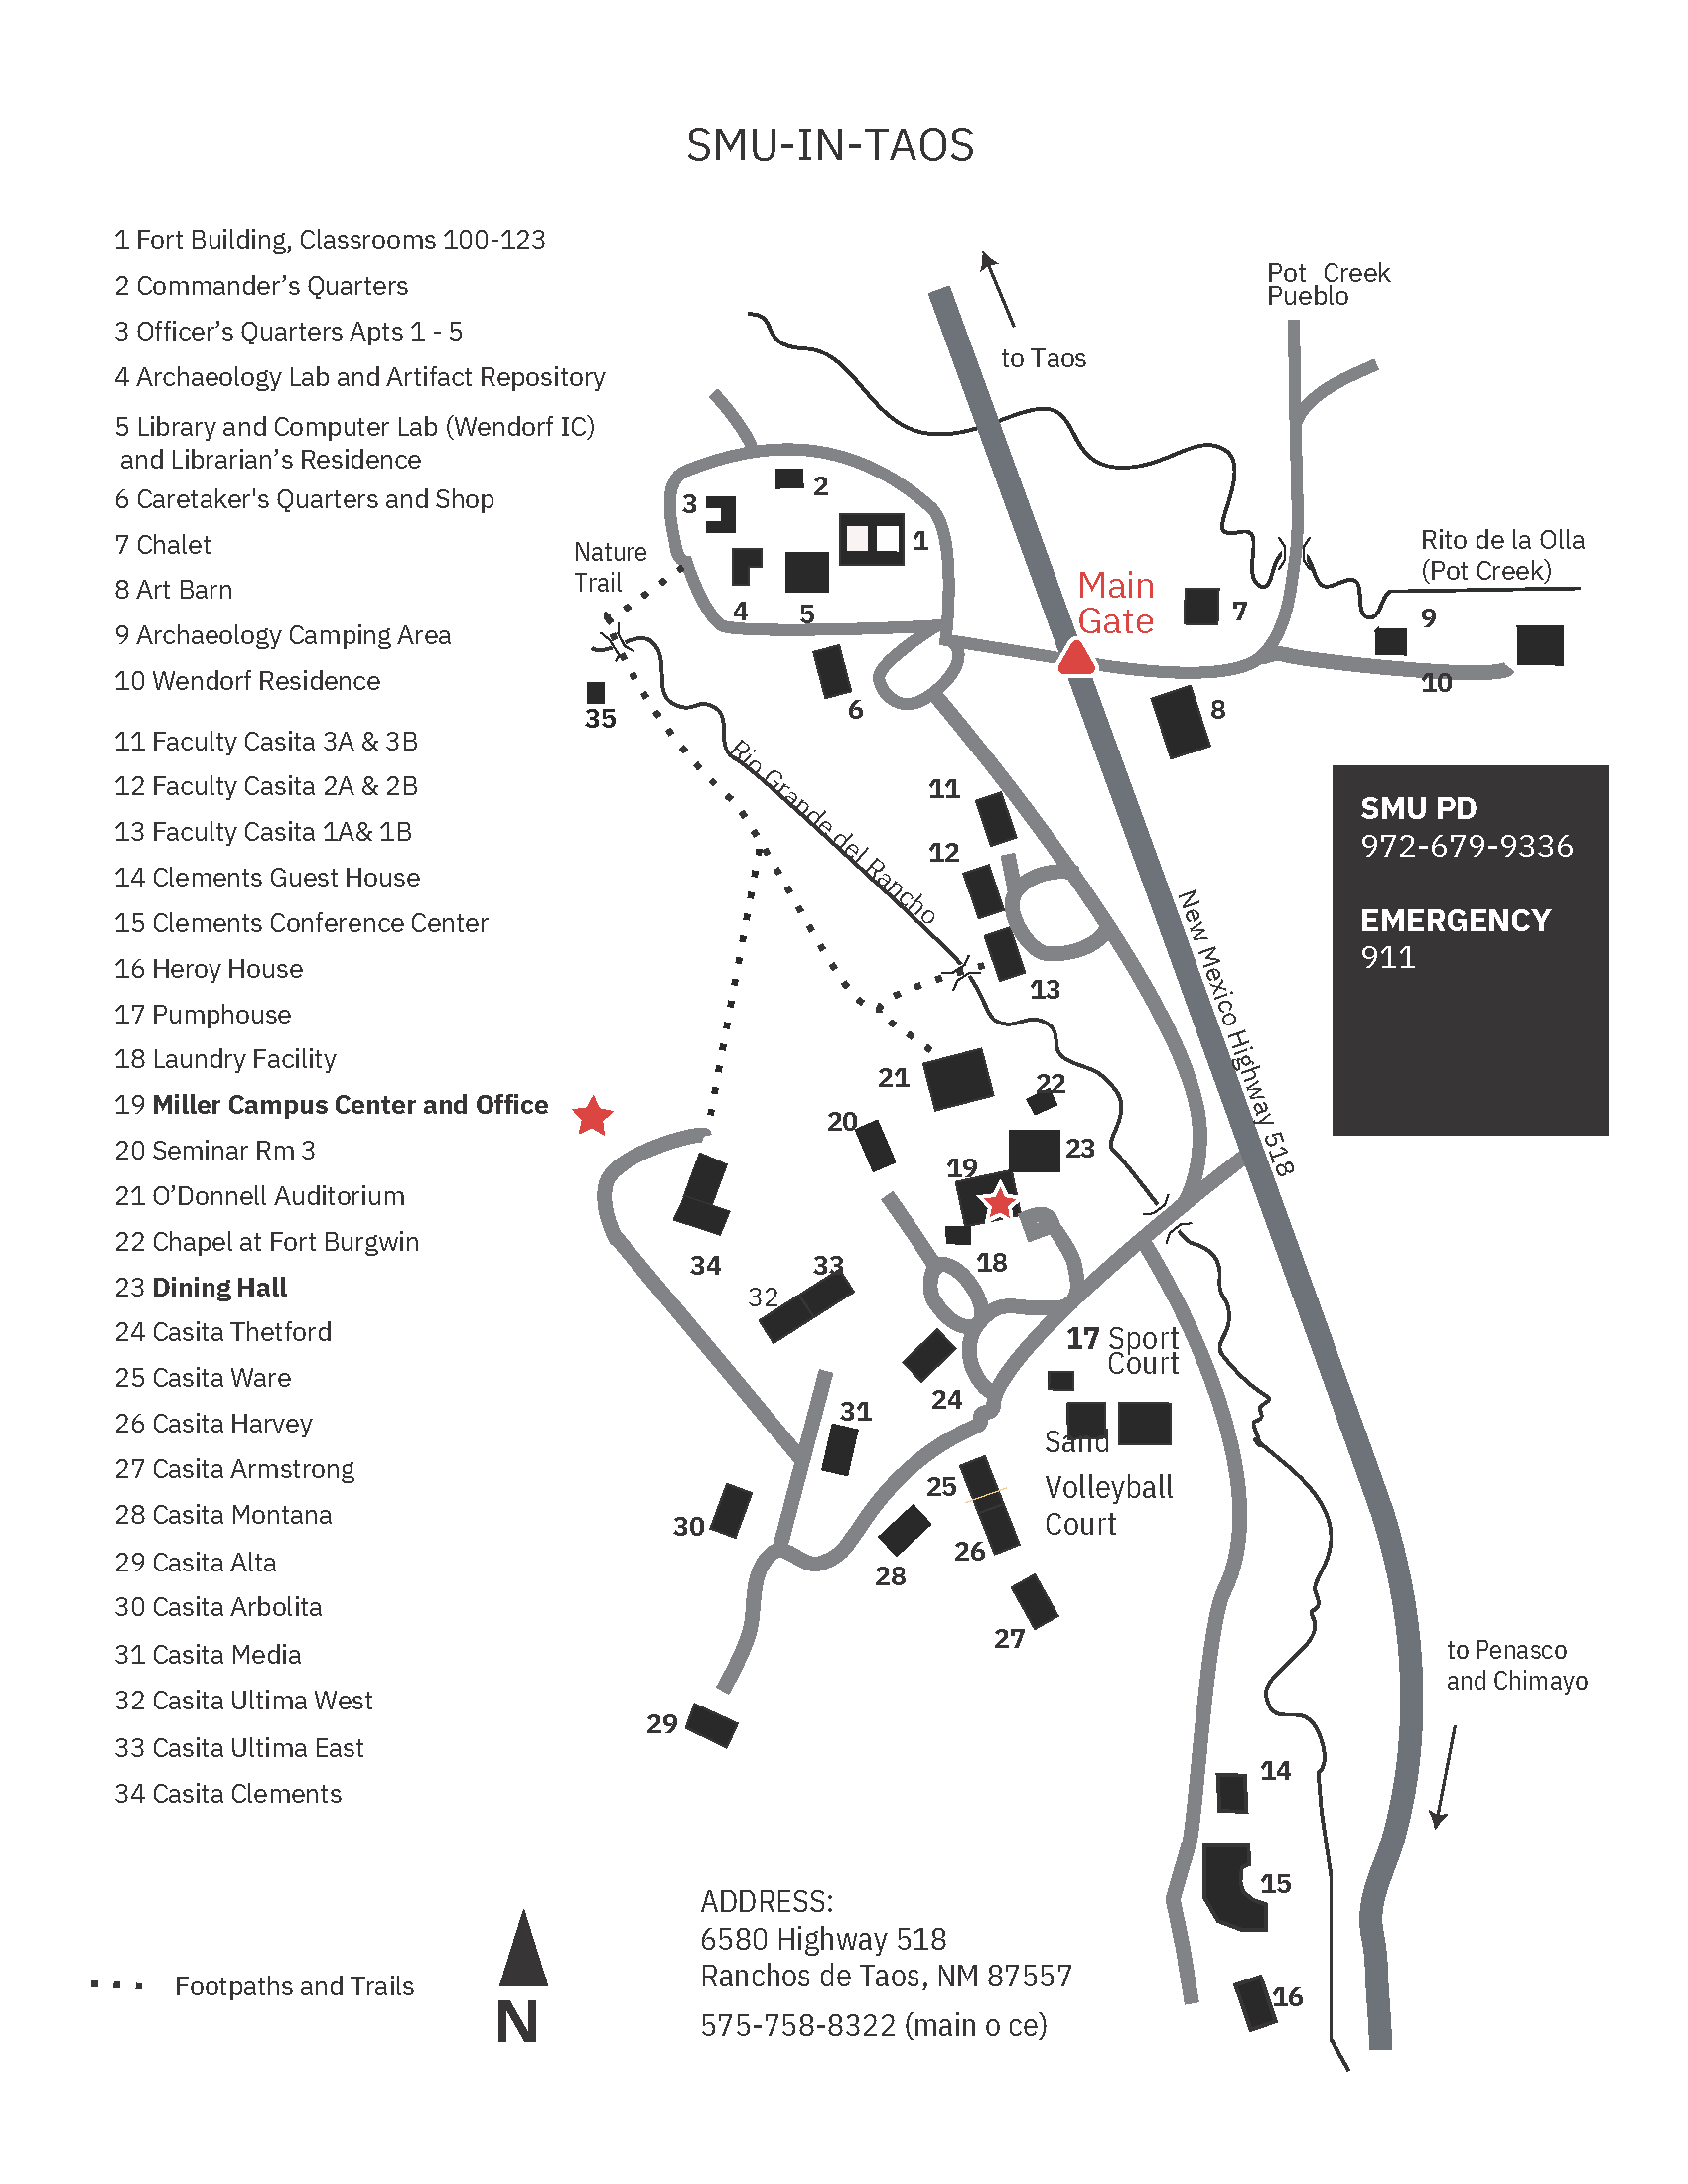 Map of The SMU-in-Taos campus